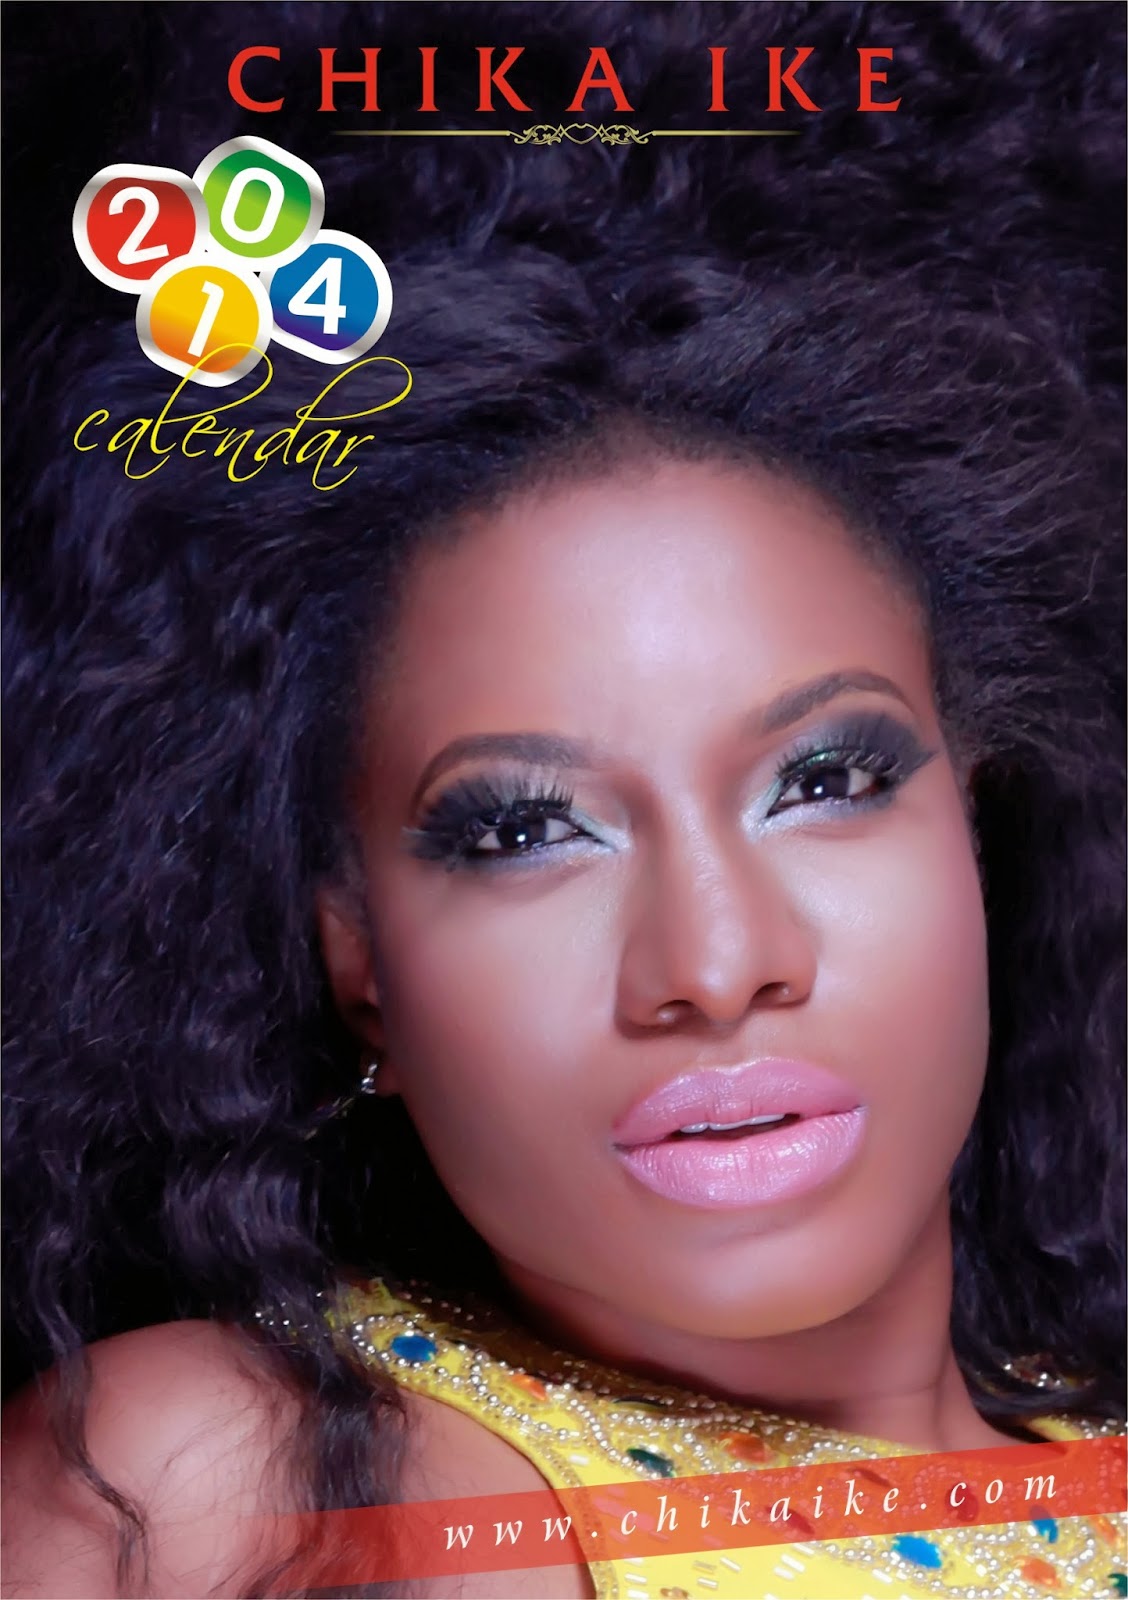 Nollywood by Mindspace: CHECK OUT CHIKA IKE'S 2014 CALENDAR